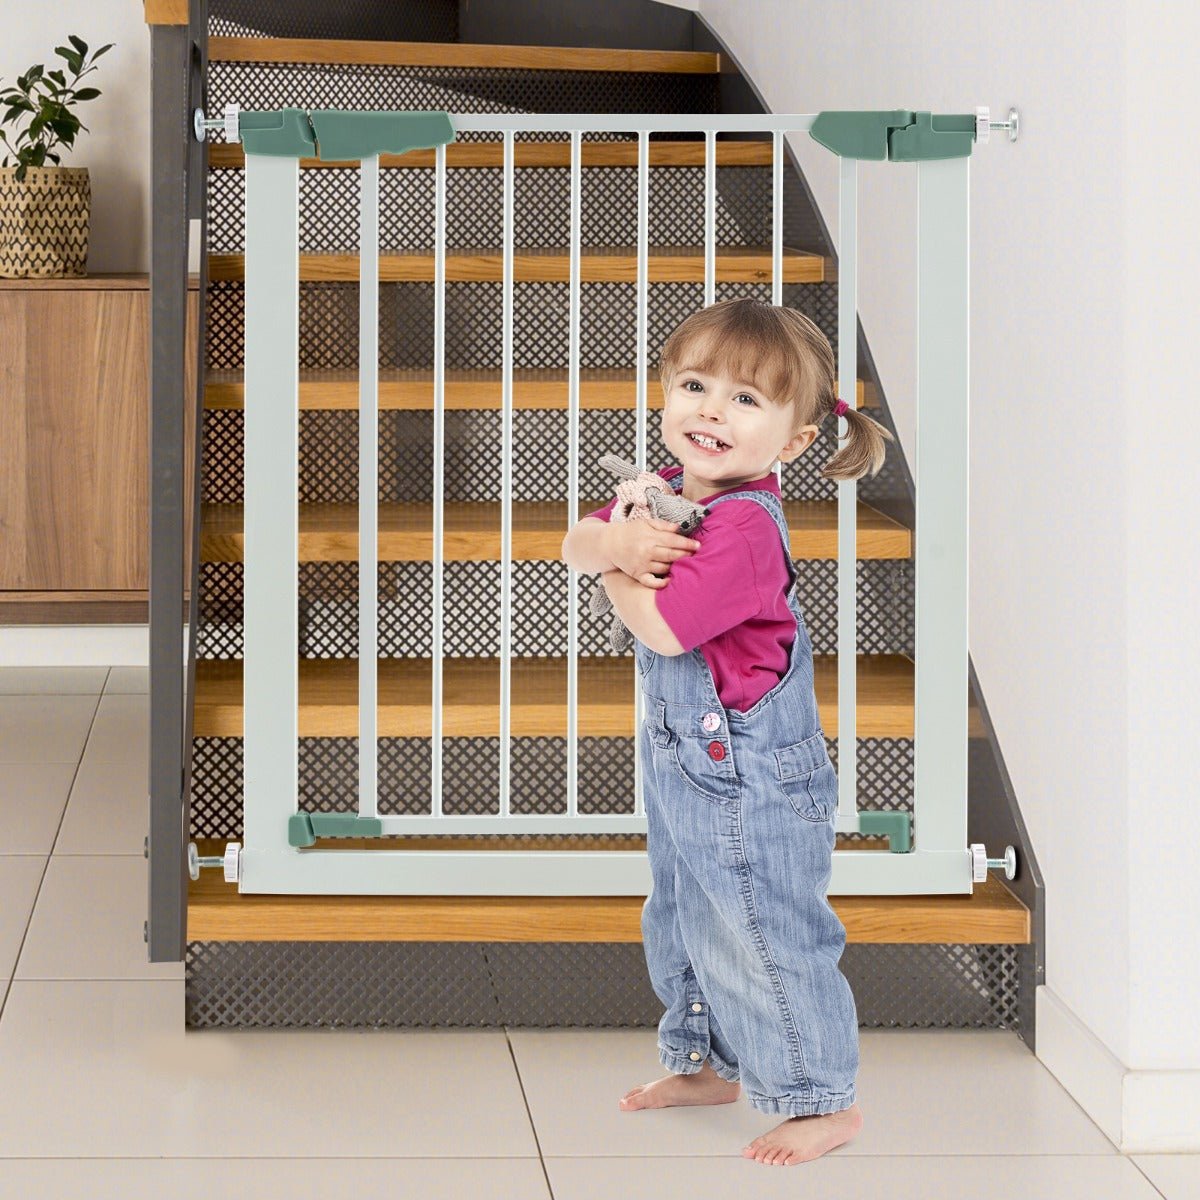 Buy White Baby Gate Now for Adventure-Proofing